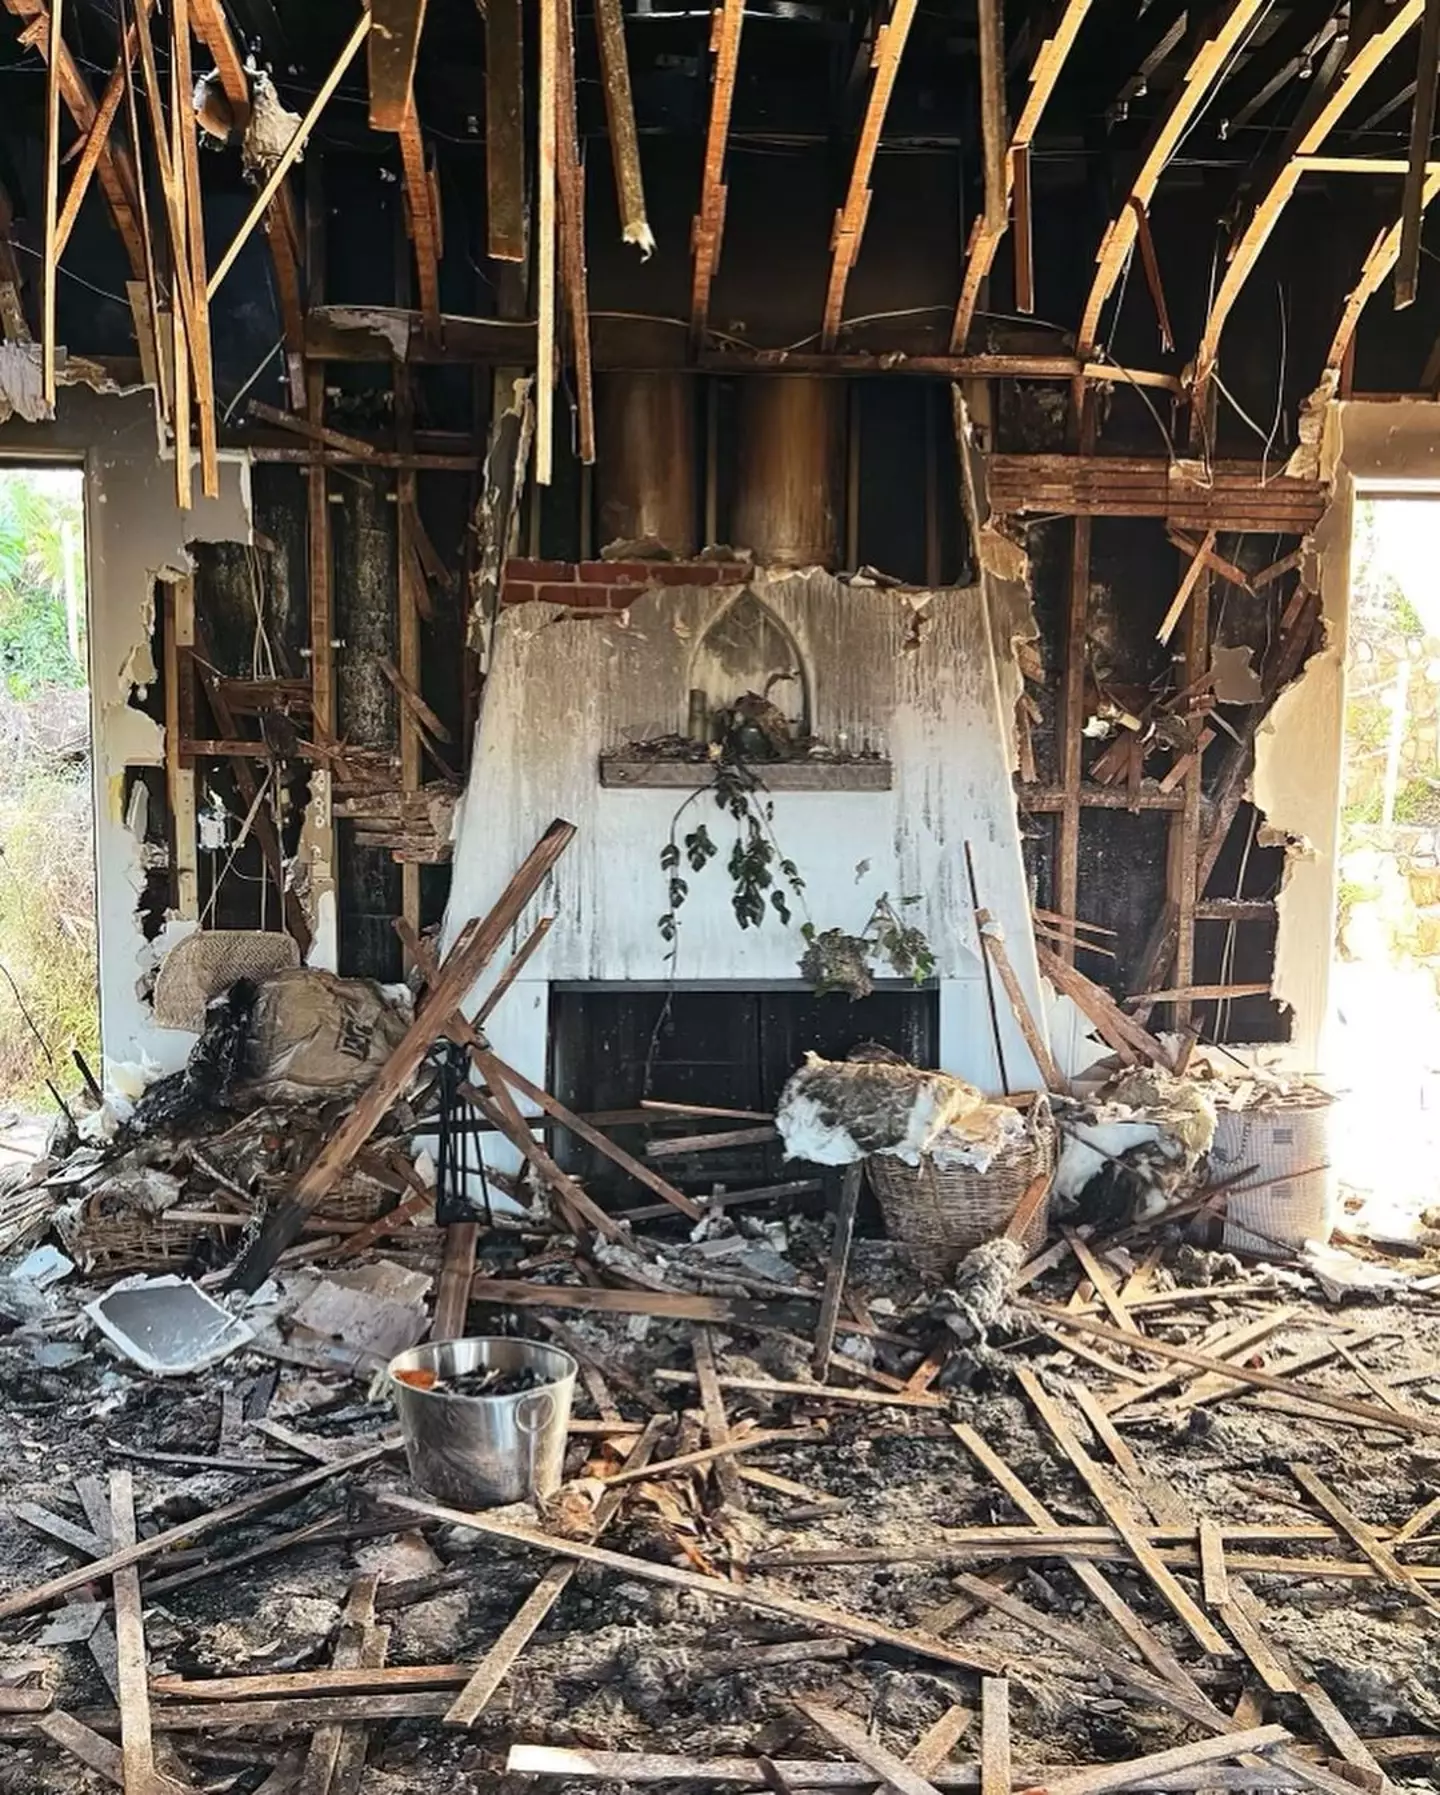 Their home after the fire.